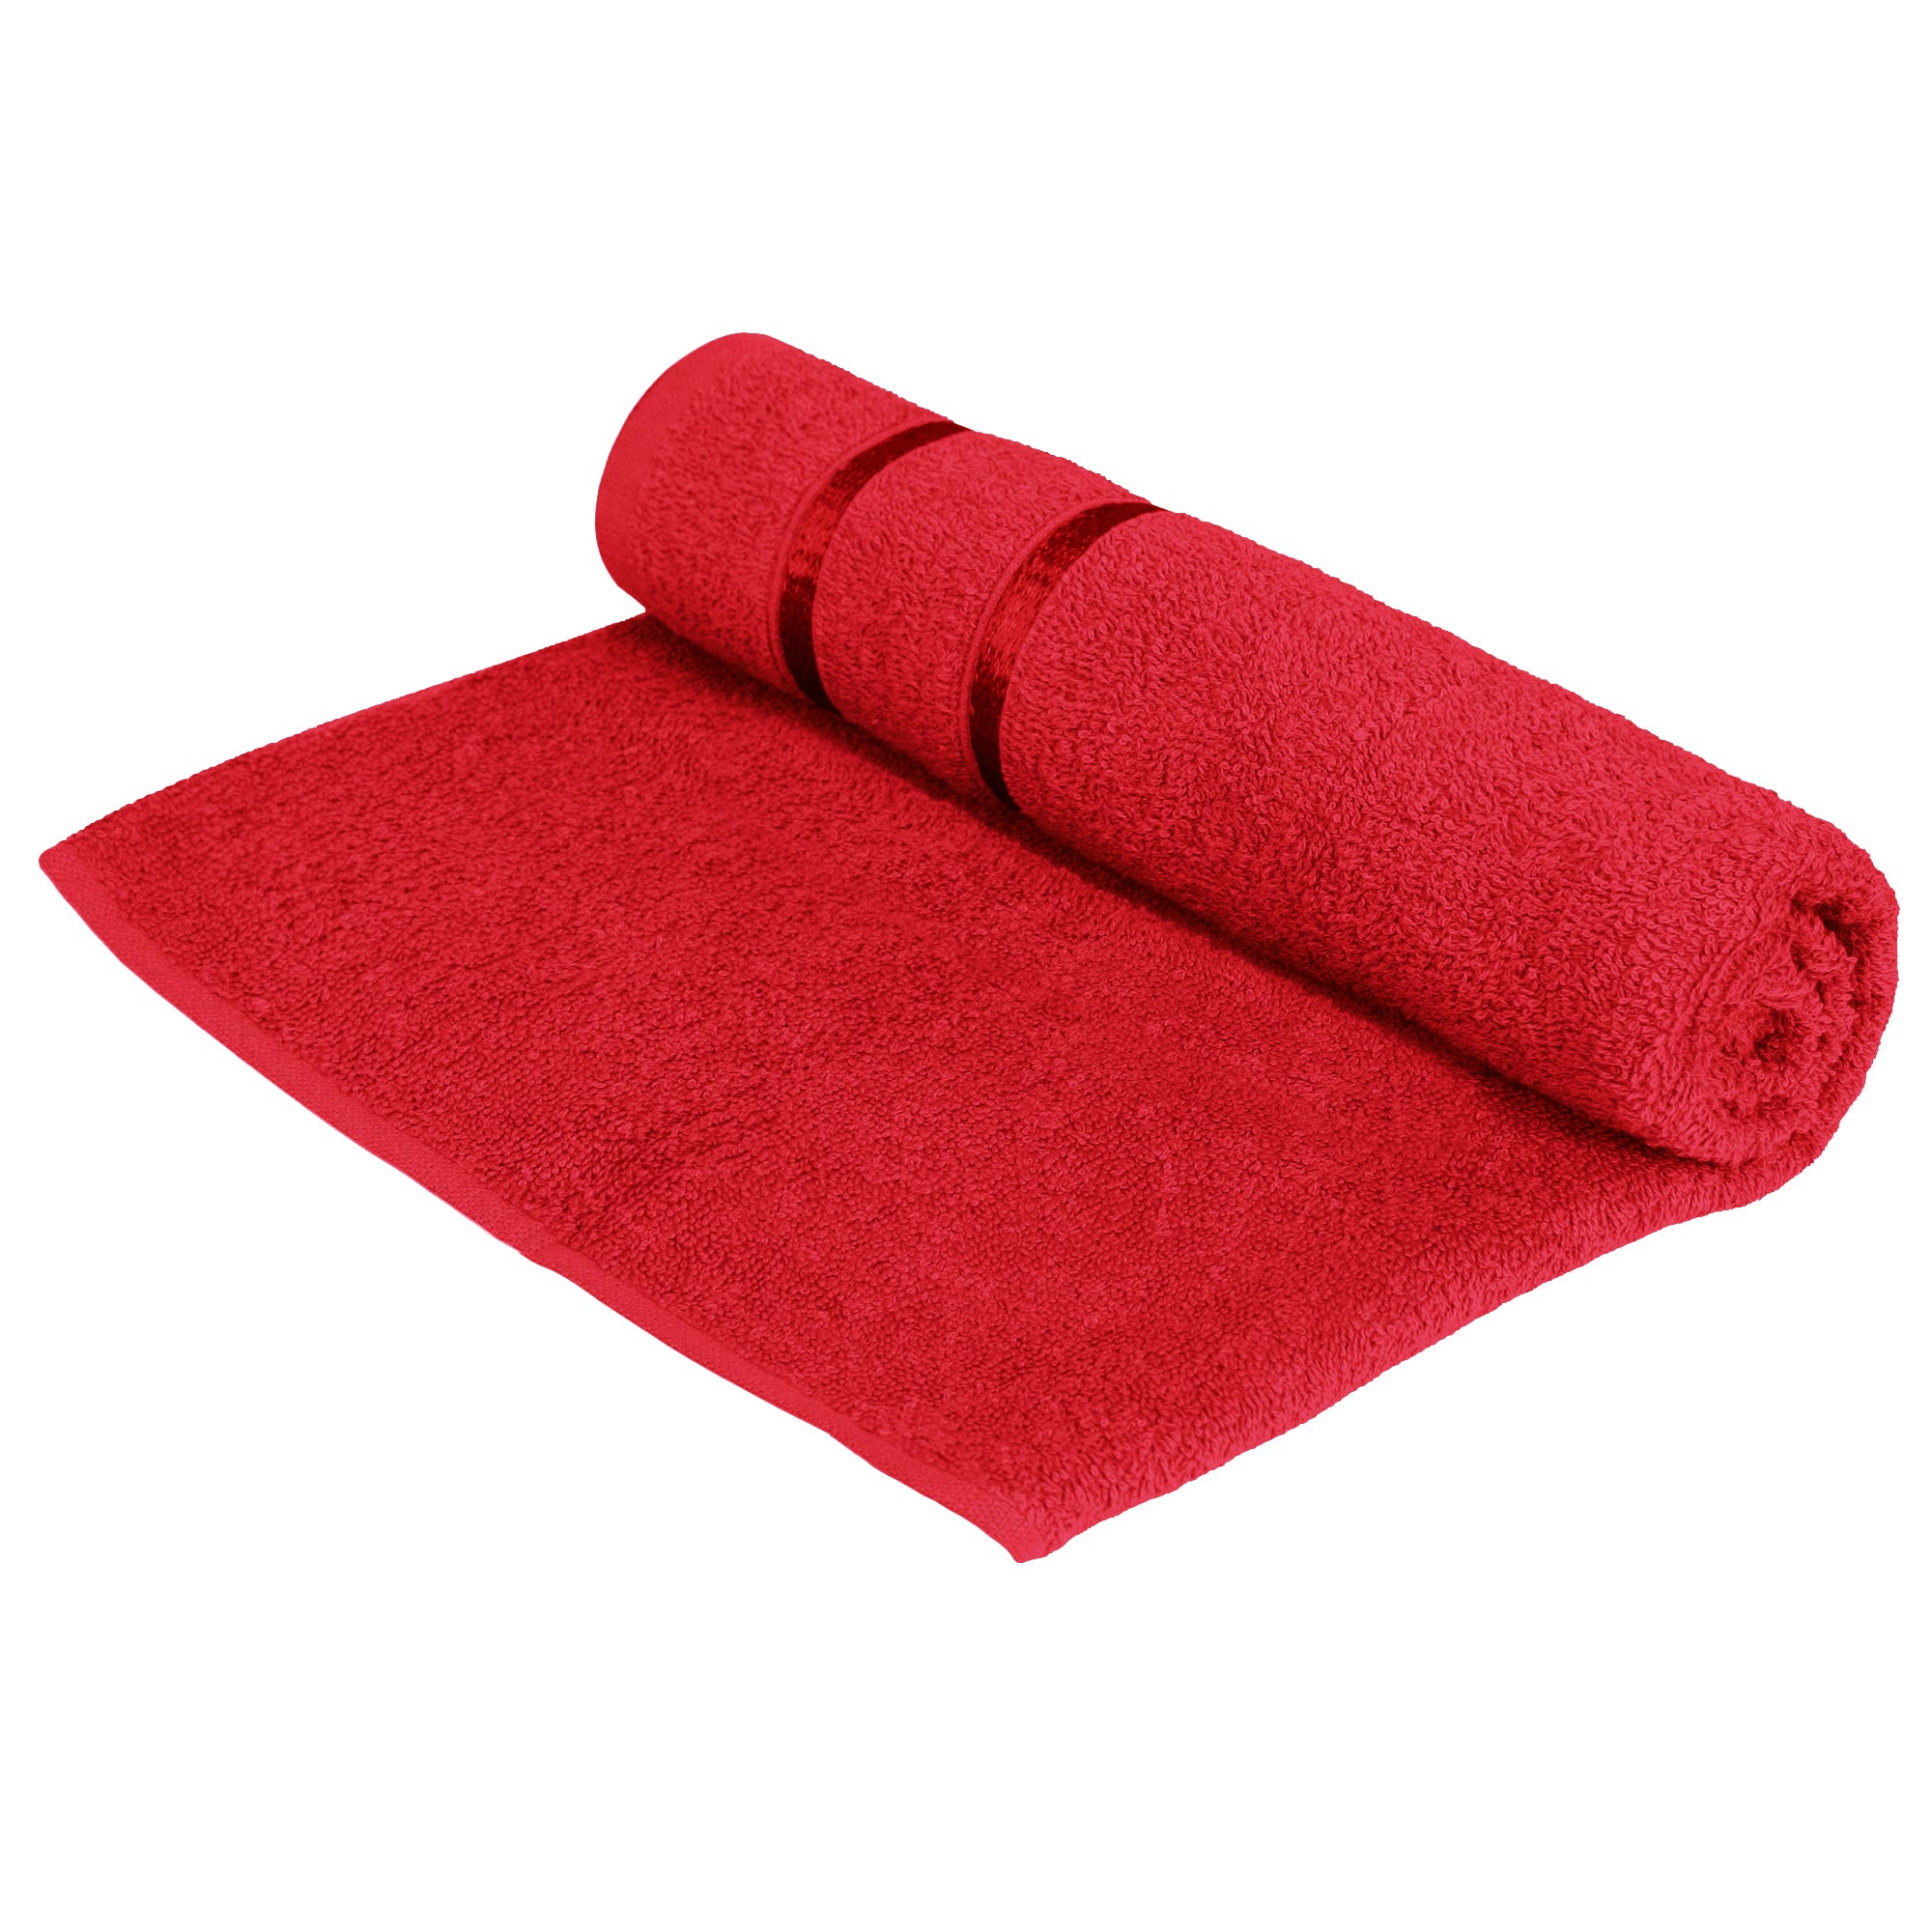 Story@Home 2 Units 100% Cotton Ladies Bath Towels - White and Wine Red